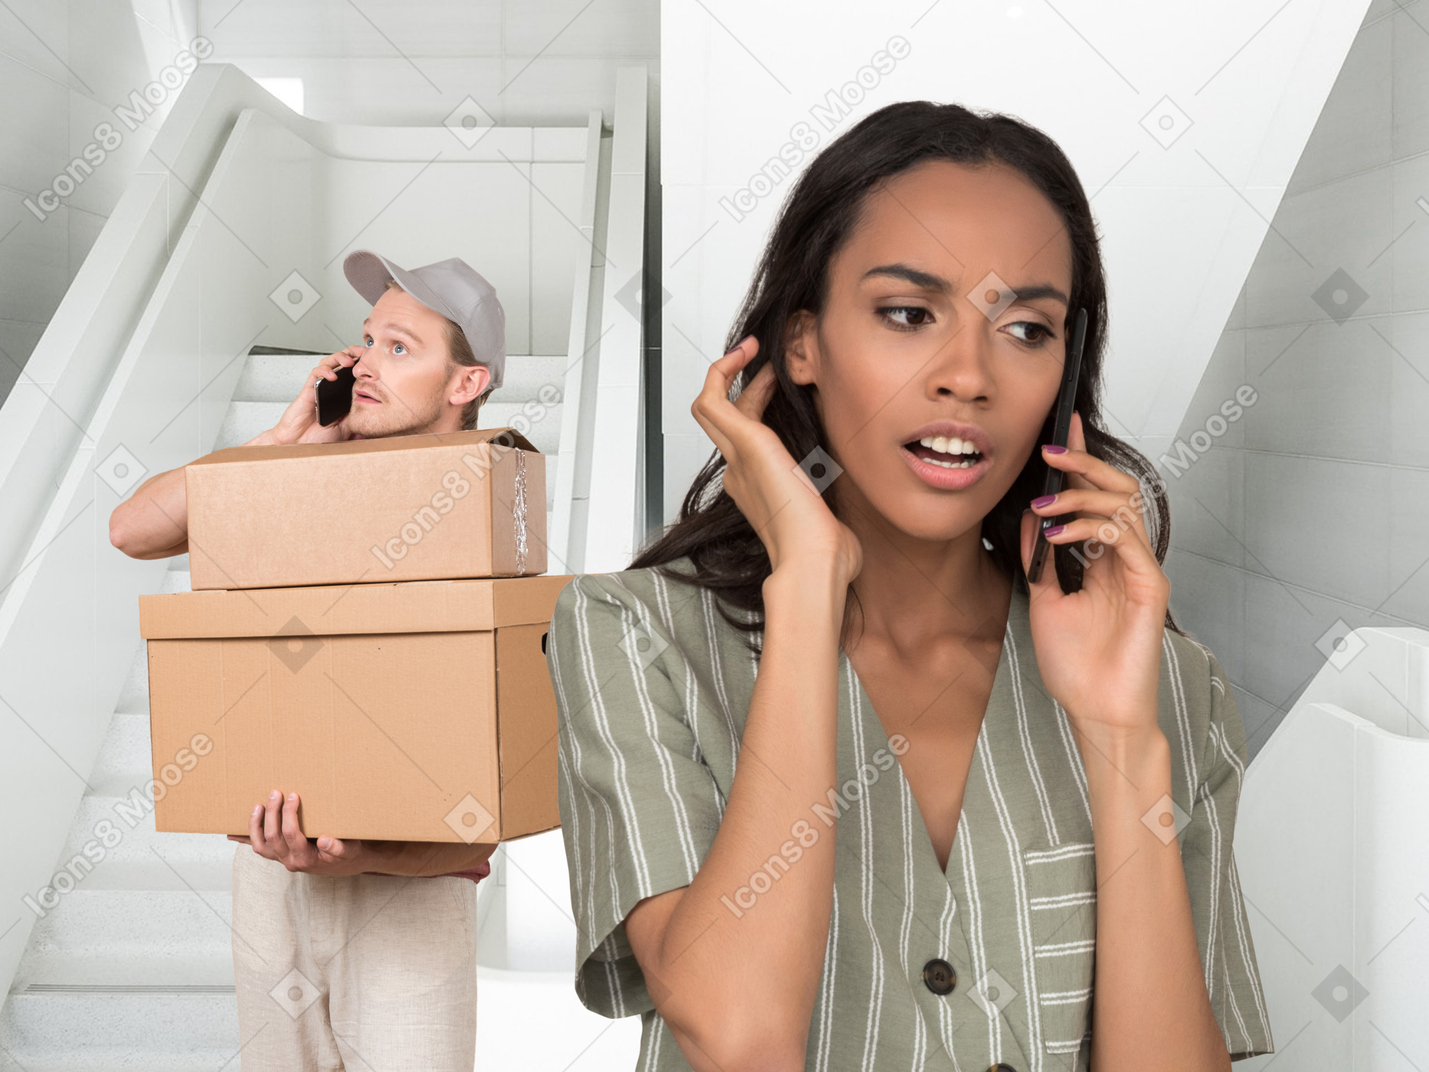 A woman talking to a delivery man on the phone